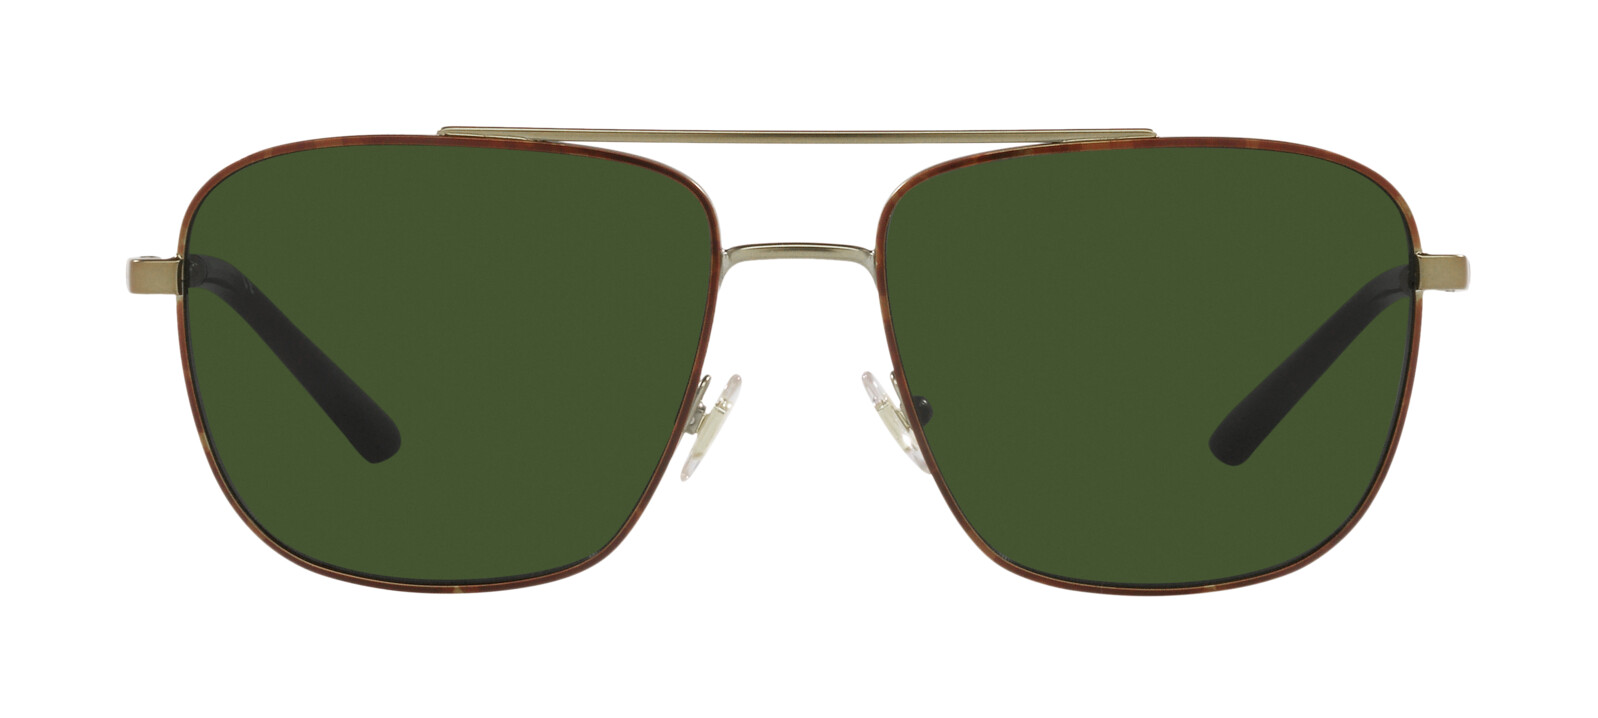 [products.image.front] Brooks Brothers 0BB4061 101871 Sonnenbrille